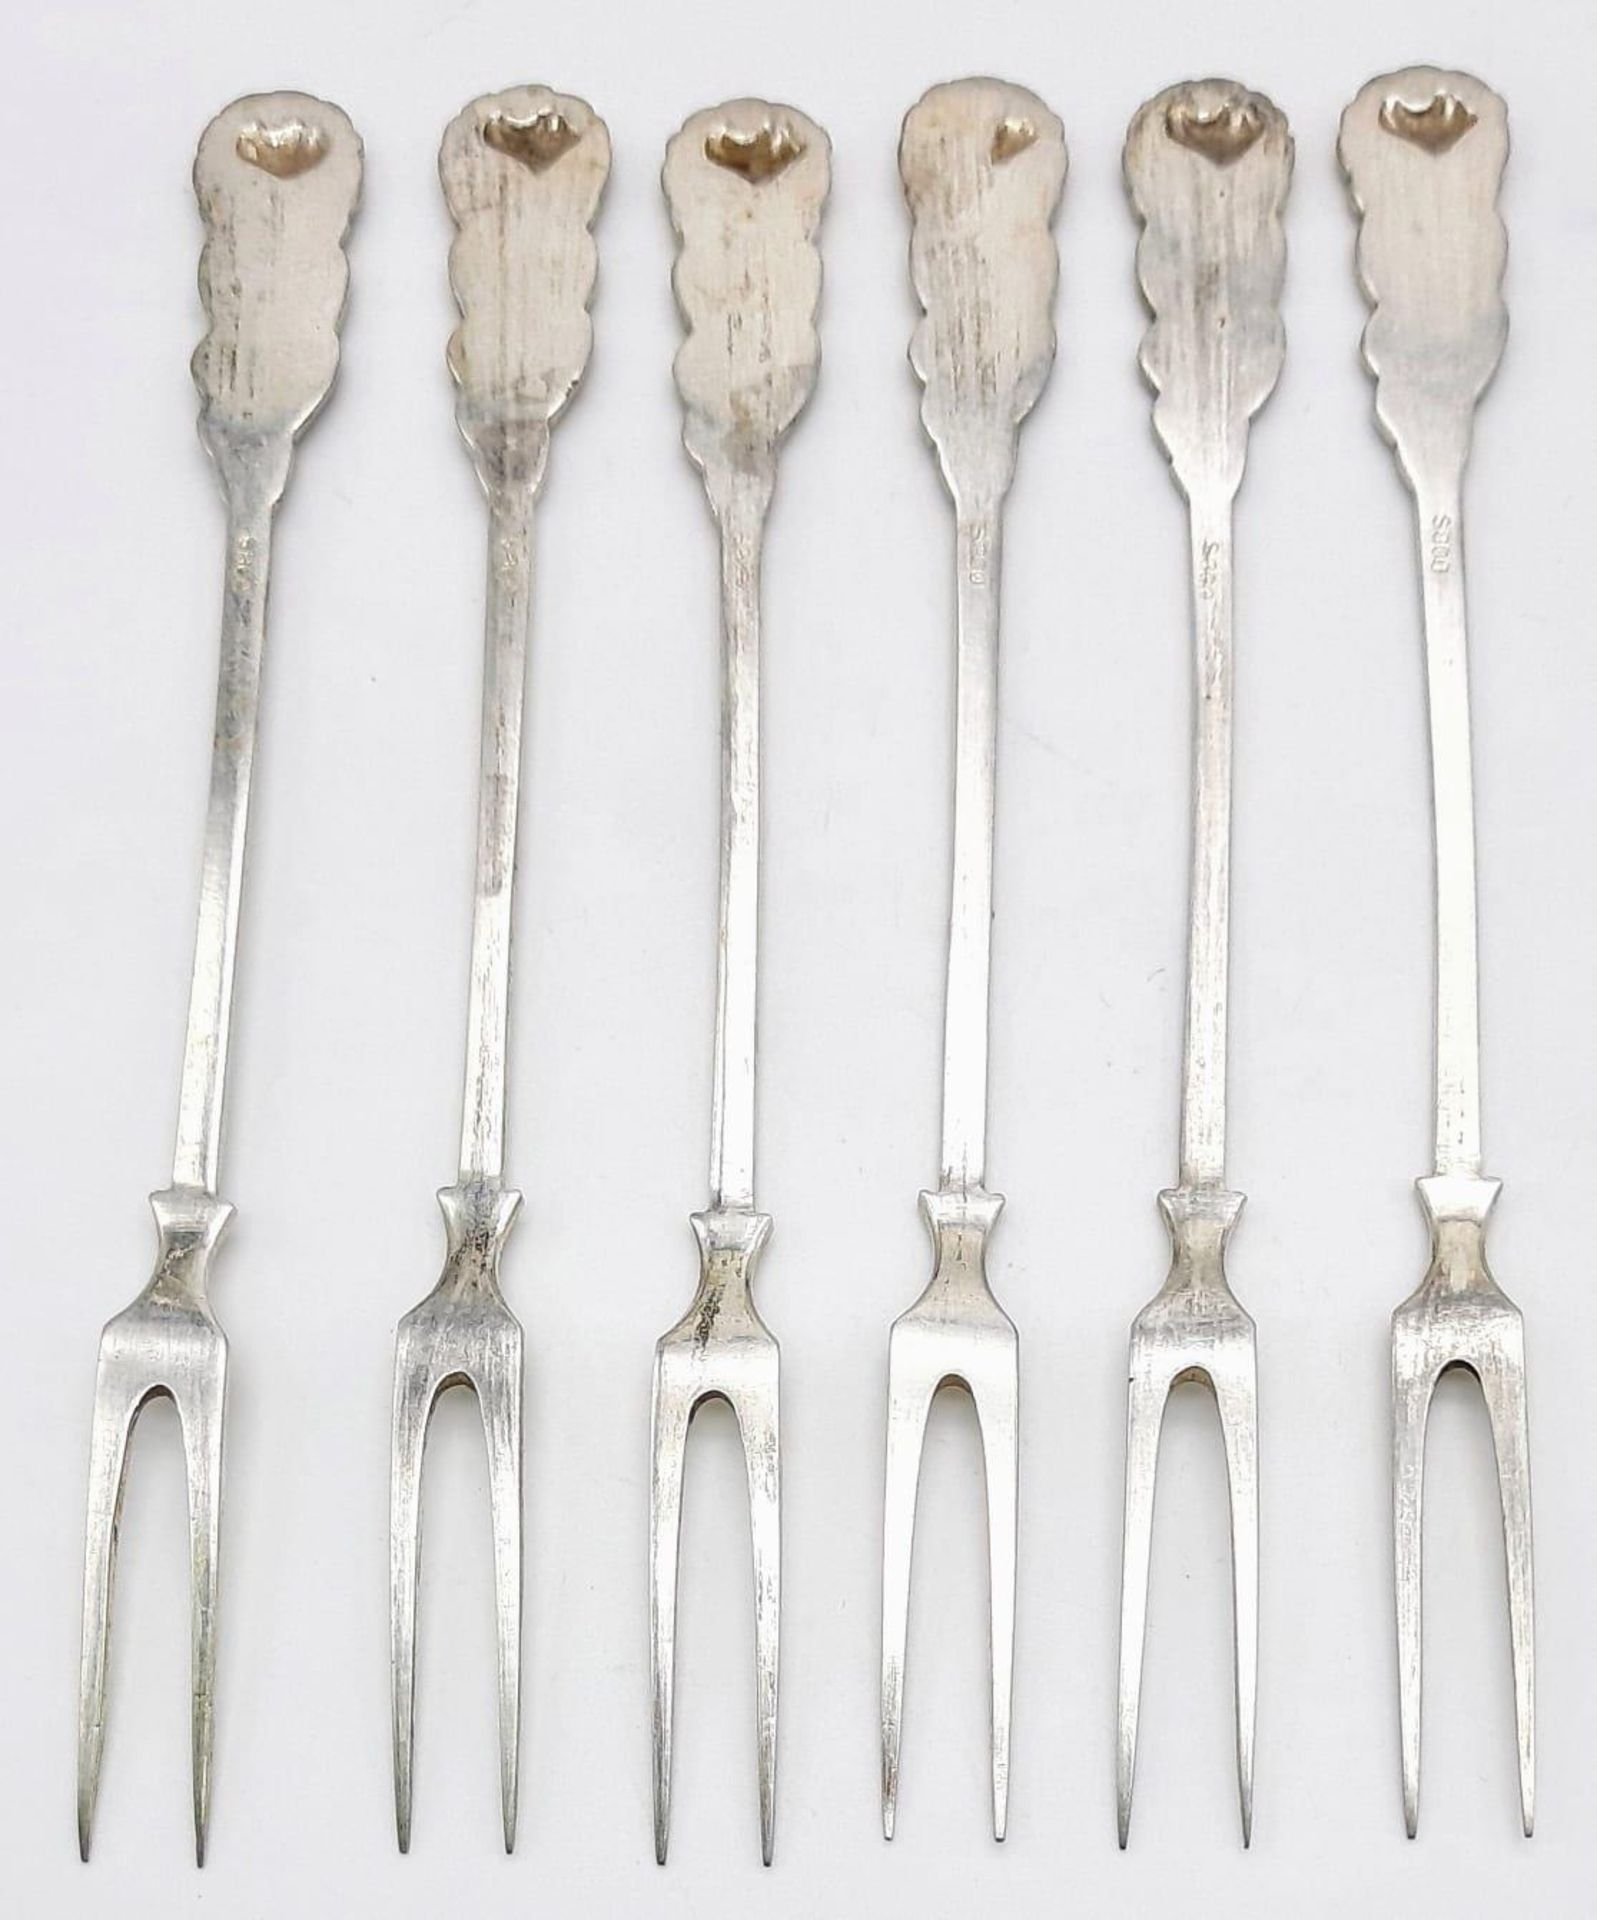 Six Antique Ornate 800 Silver Pickle/Relish Forks. 15cm length. 76g total weight. - Image 2 of 3